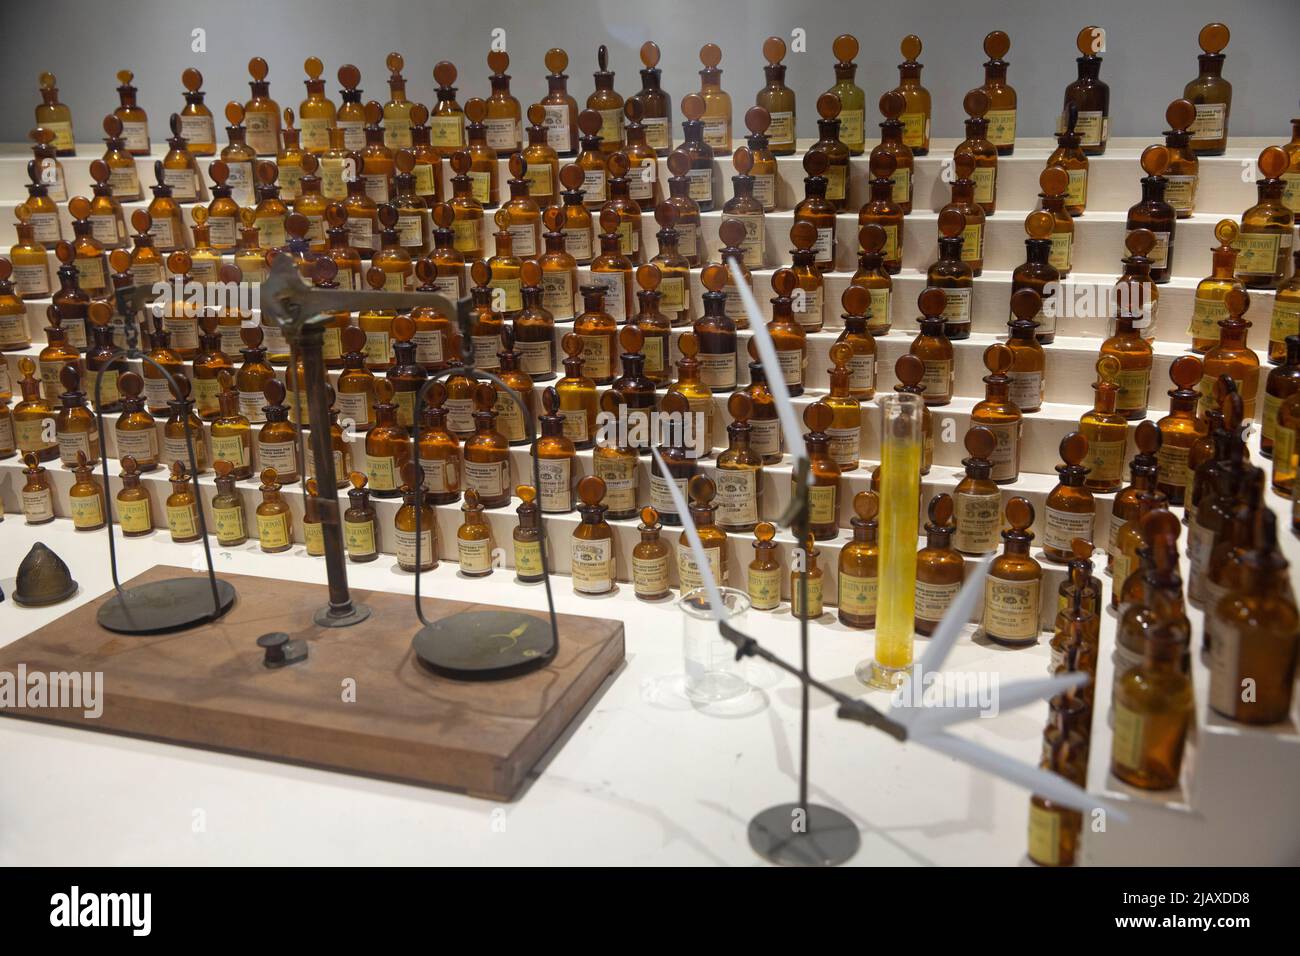 The perfumer's organ that belonged to Jean Carles, the early 20th century creator of perfumes including Miss Dior and Ma Griffe by Carven, at the Musée International de la Parfumerie (International Perfume Museum) in Grasse, France on September 9, 2021. Head of the first school of perfumery in Grasse, it is Carles who conceived the olfactory pyramid. Grasse has had a prospering perfume industry since the end of the 18th century and is considered the world's capital of perfume. There are numerous of old 'parfumeries' in Grasse, such as Galimard, Molinard and Fragonard, each with tours and a mus Stock Photo